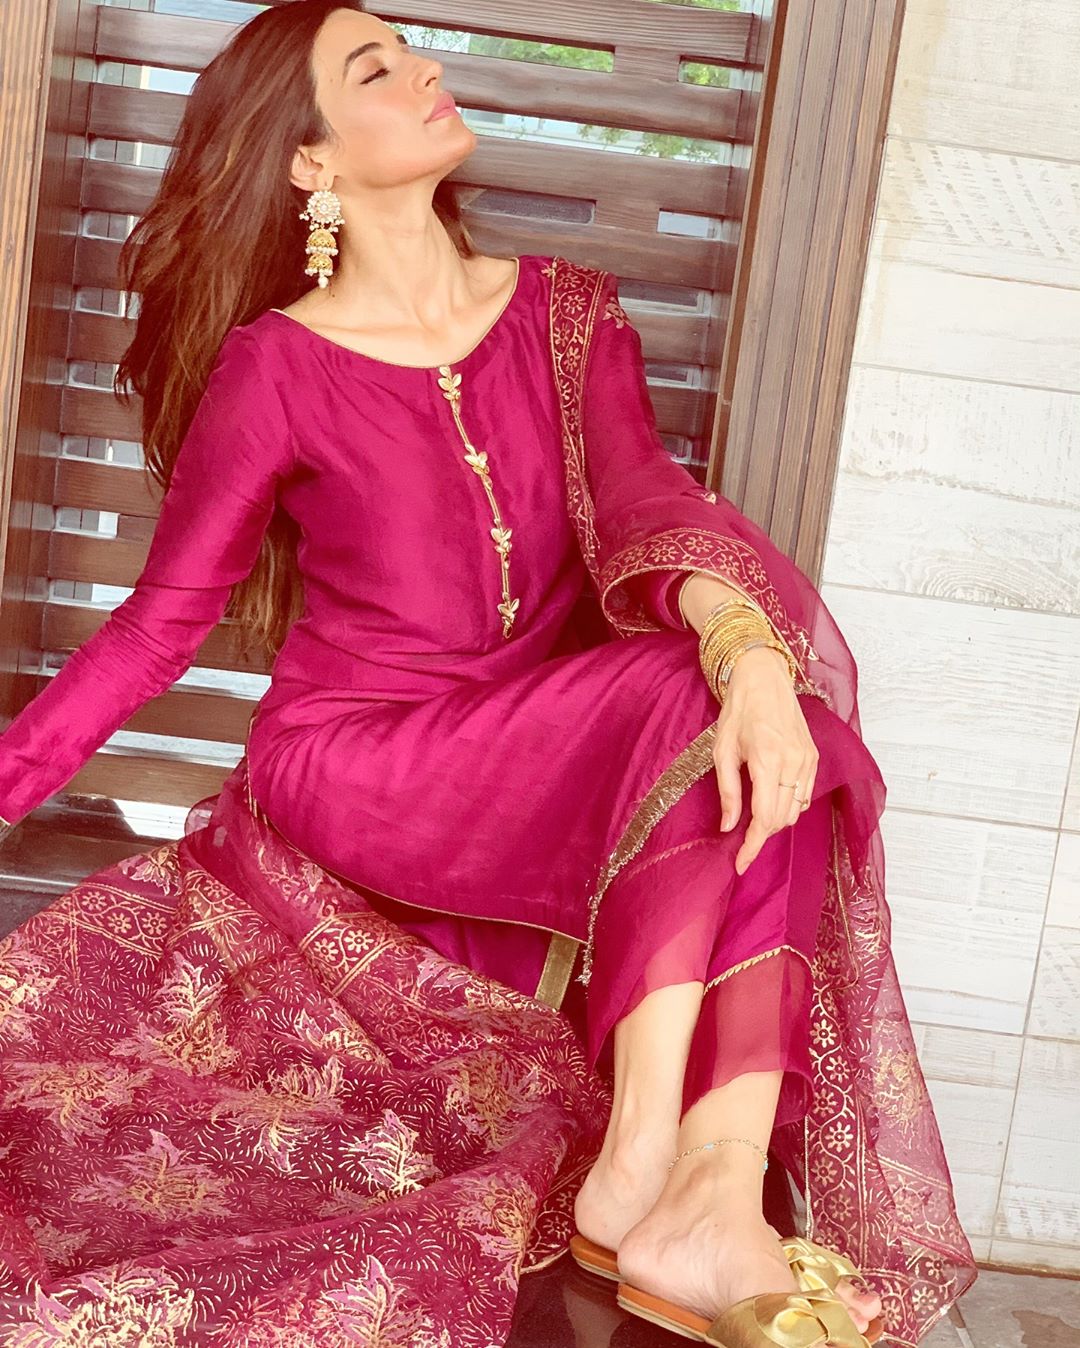 Beautiful Pakistani Celebrities First Day Eid Pictures – Part-3